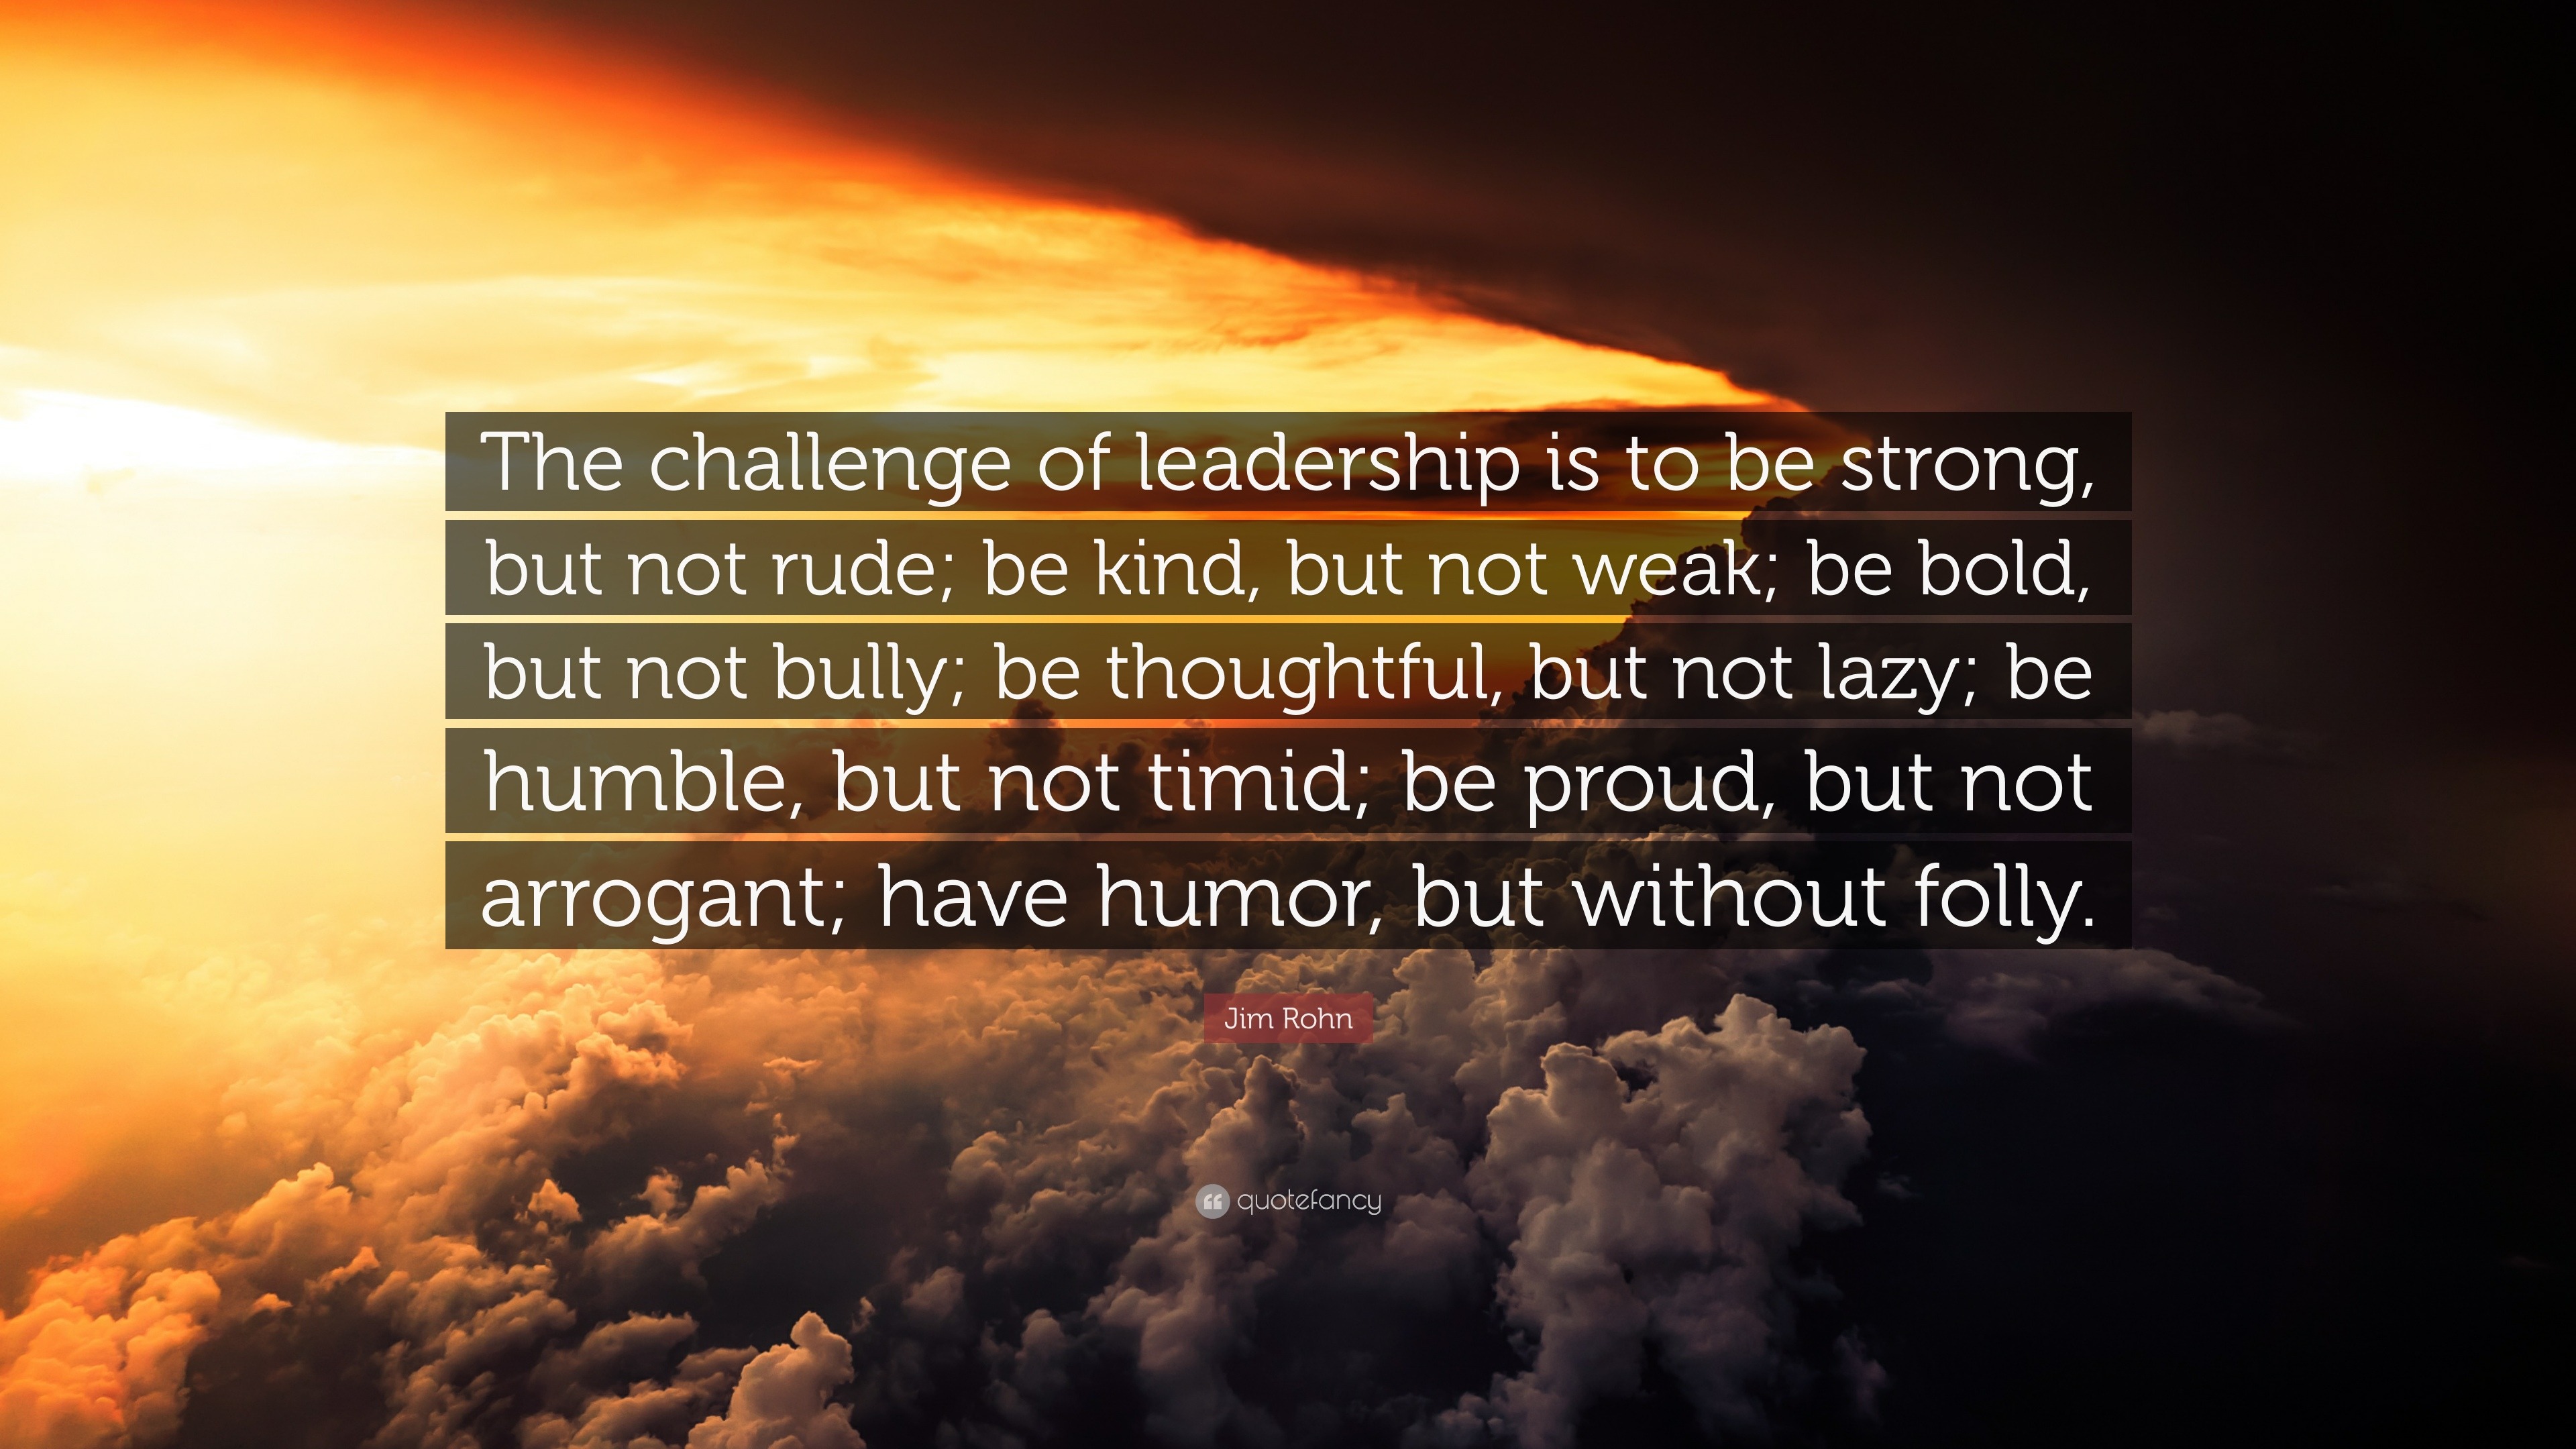 Jim Rohn Quote: “The challenge of leadership is to be strong, but not